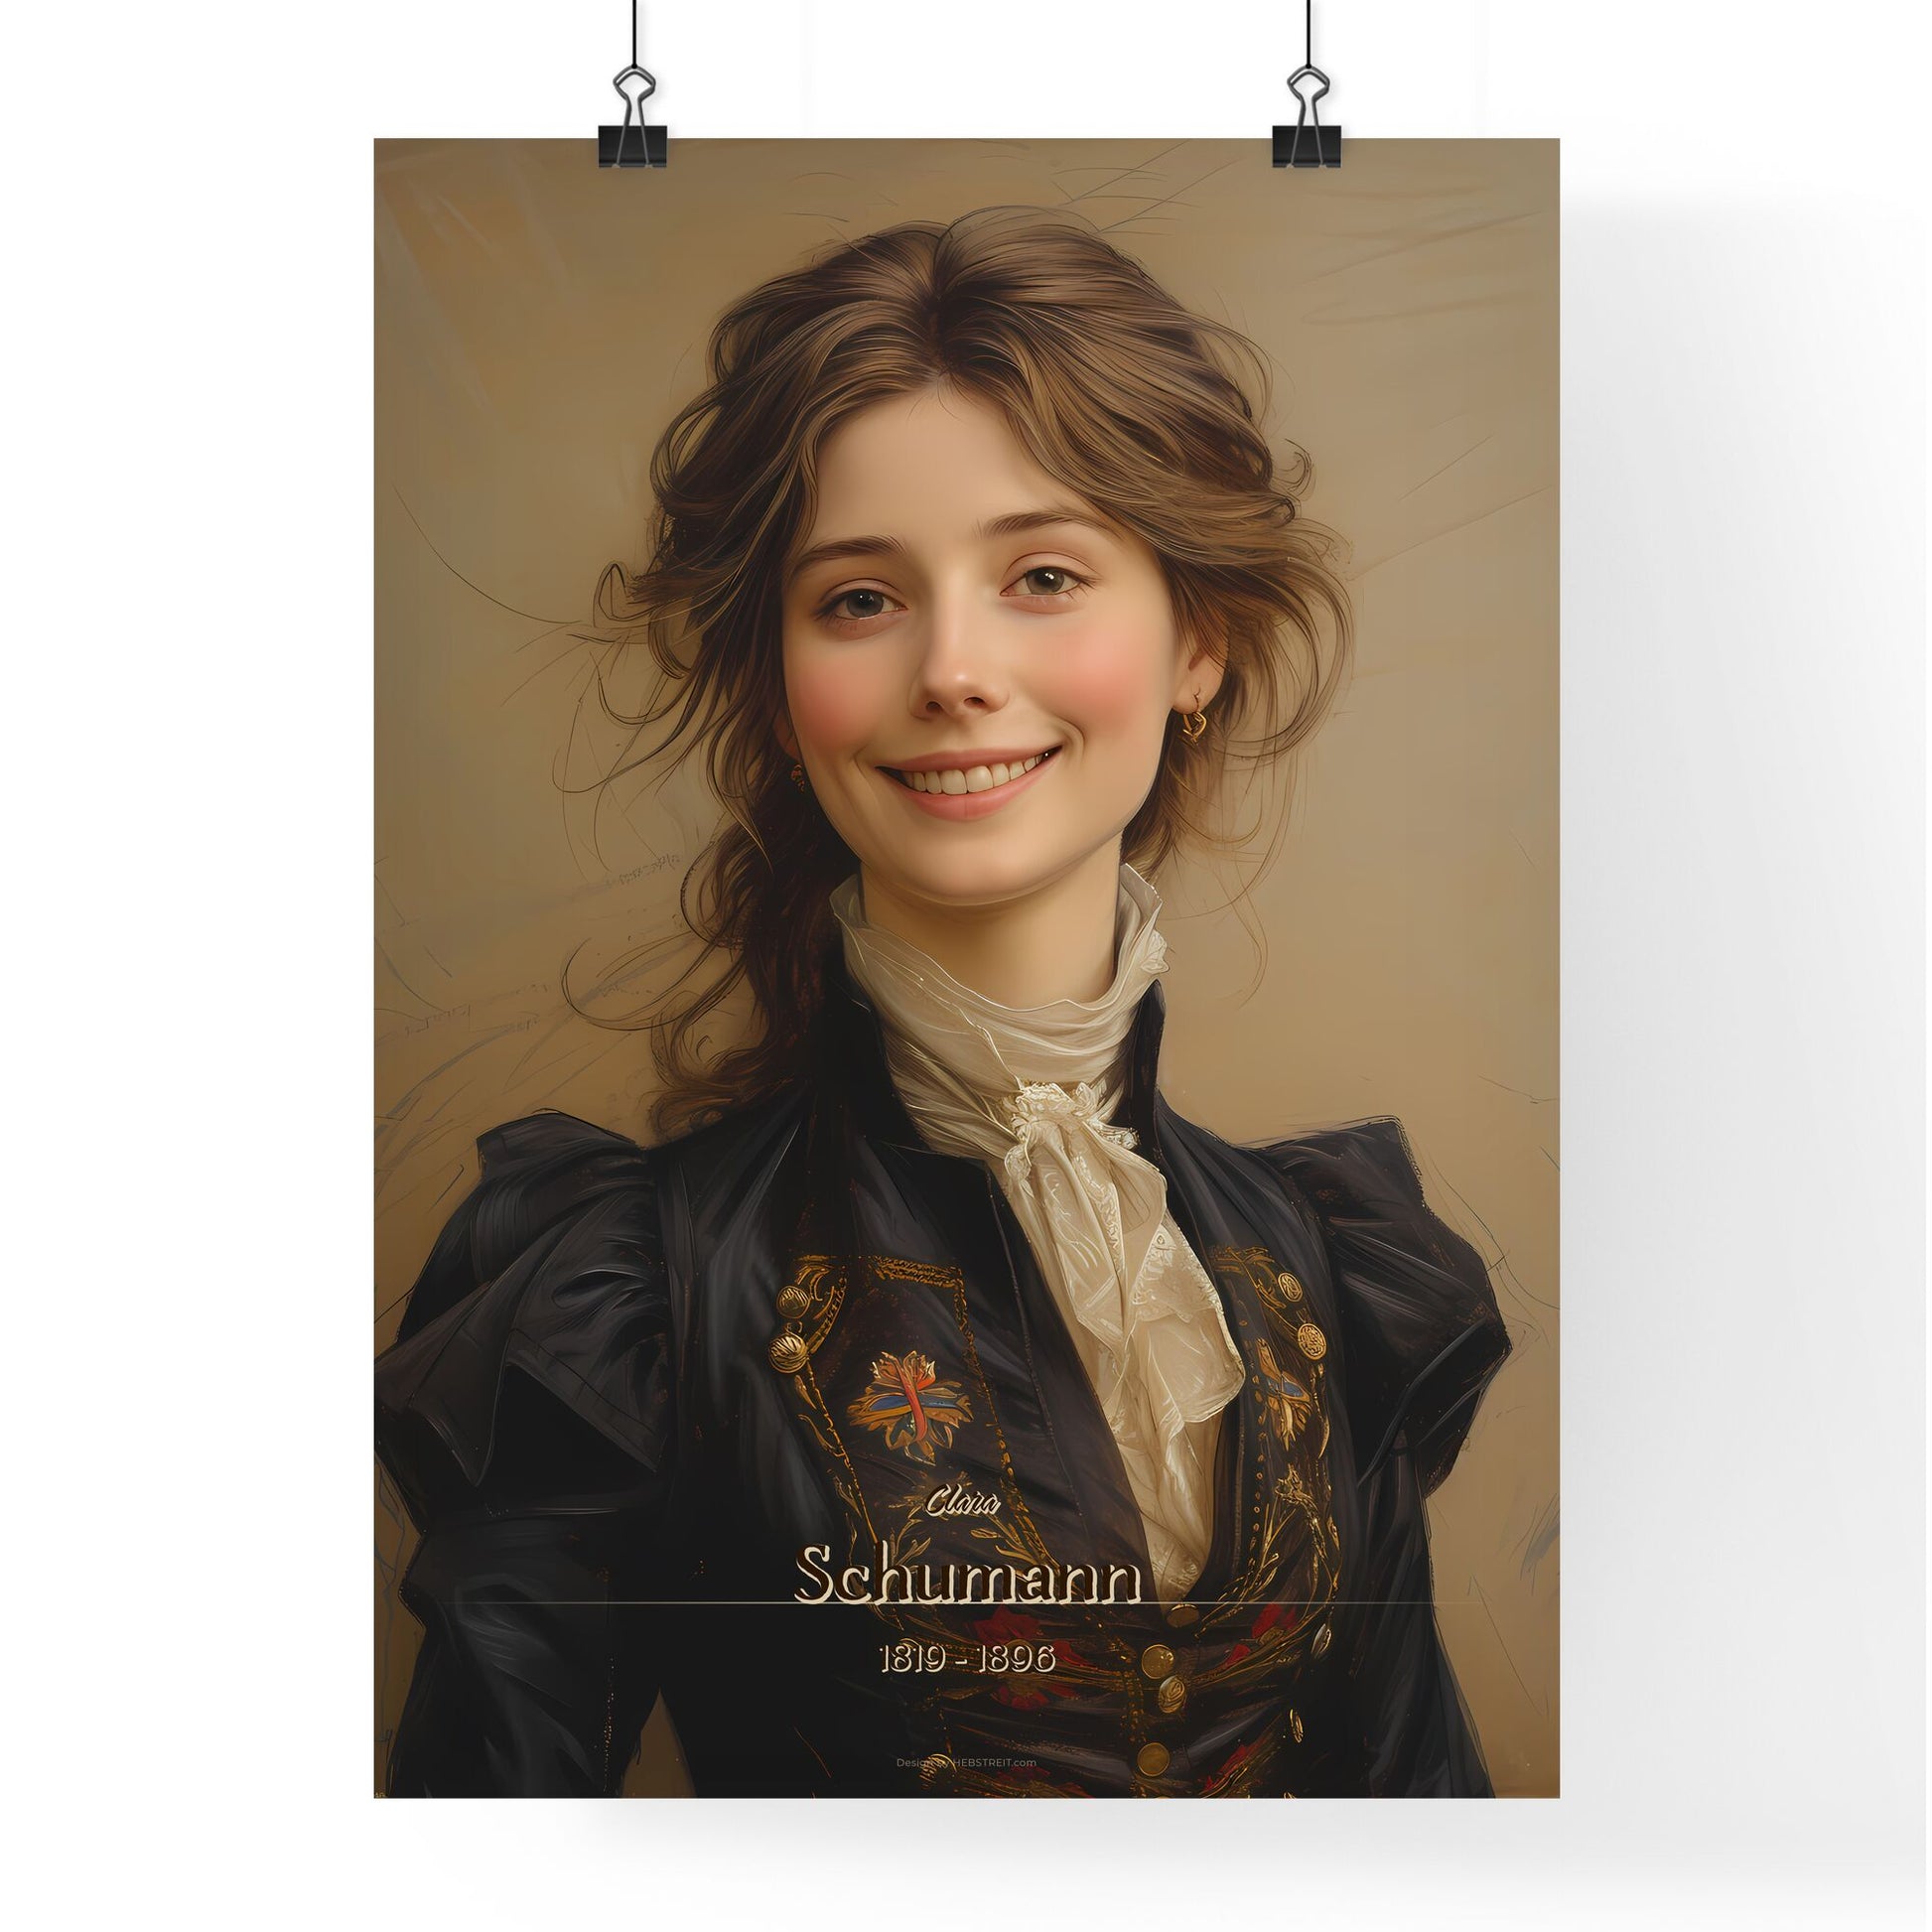 Clara, Schumann, 1819 - 1896, A Poster of a woman smiling at the camera Default Title